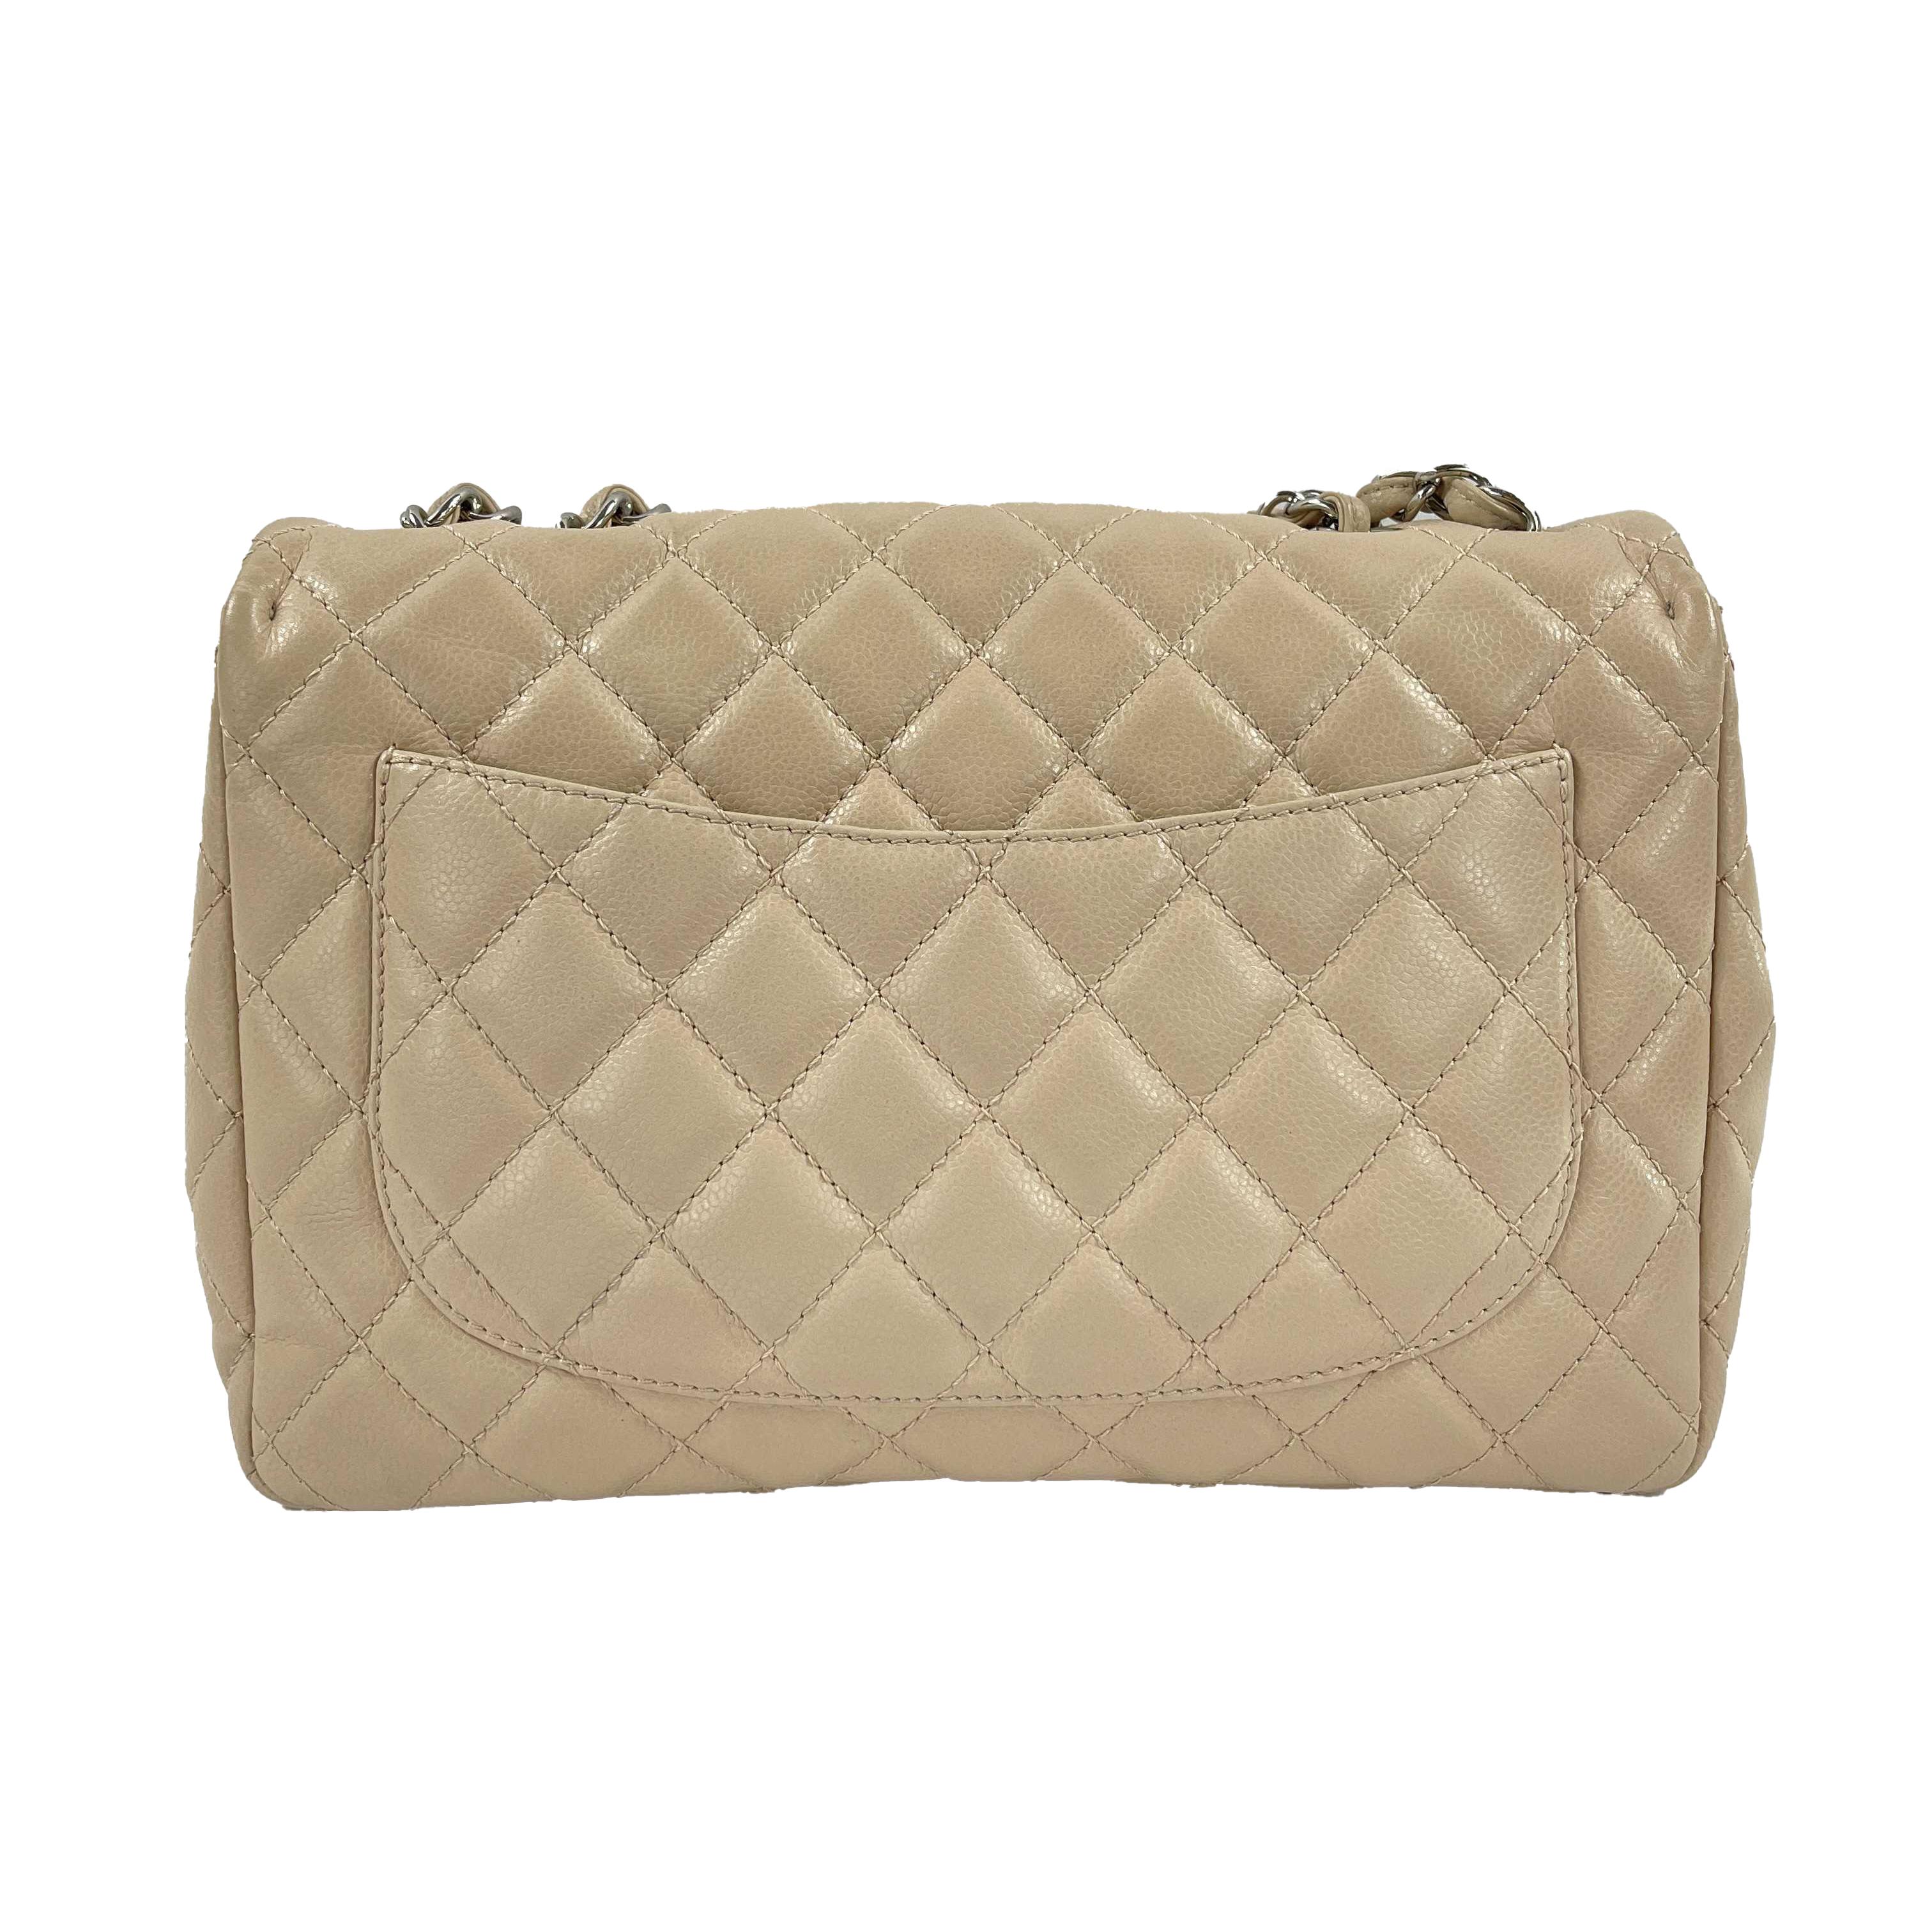 From the 2008 collection.
This classic Chanel flap handbag is crafted with beige quilted lambskin leather and silver-toned hardware.
The flap opens using an interlocking CC turn-lock to one compartment lined in a smooth beige leather with a slip